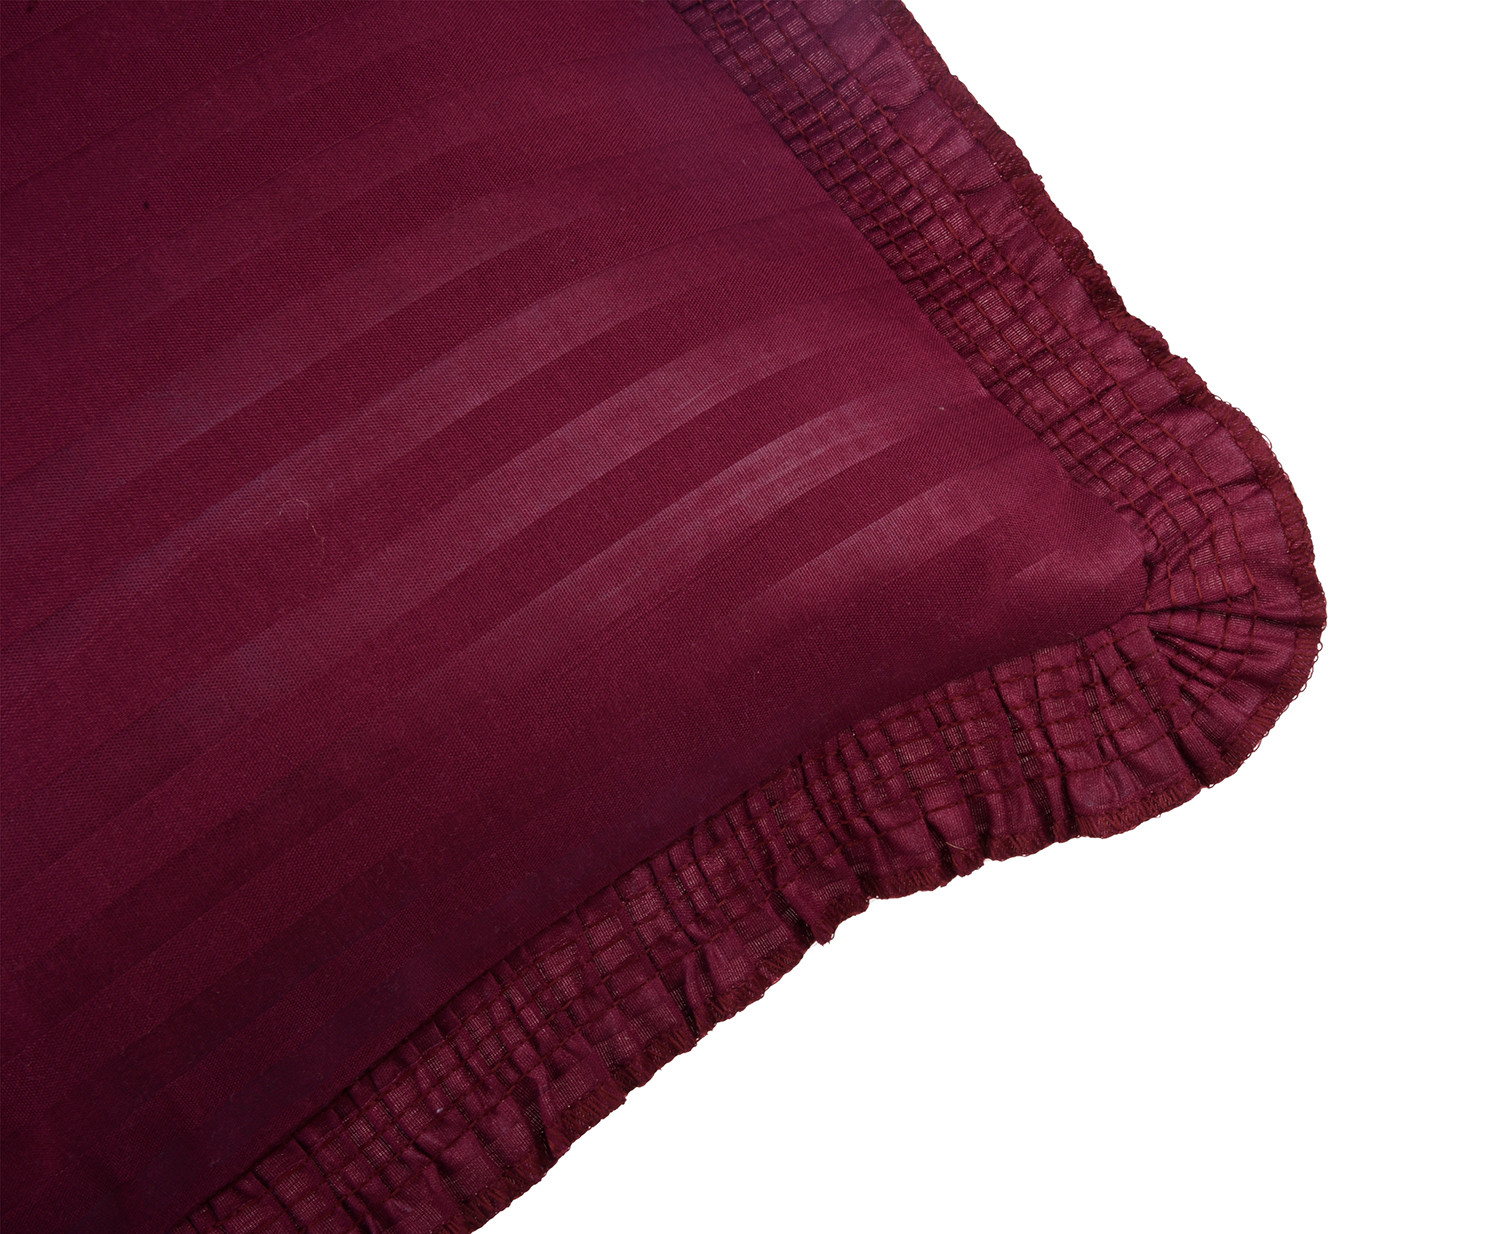 Kuber Industries Pillow Cover | Cotton Pillow Cover Set | Cushion Pillow Cover Set | Premium Pillow Cover Set for Bedroom | Lining Frill Pillow Cover Set |Maroon